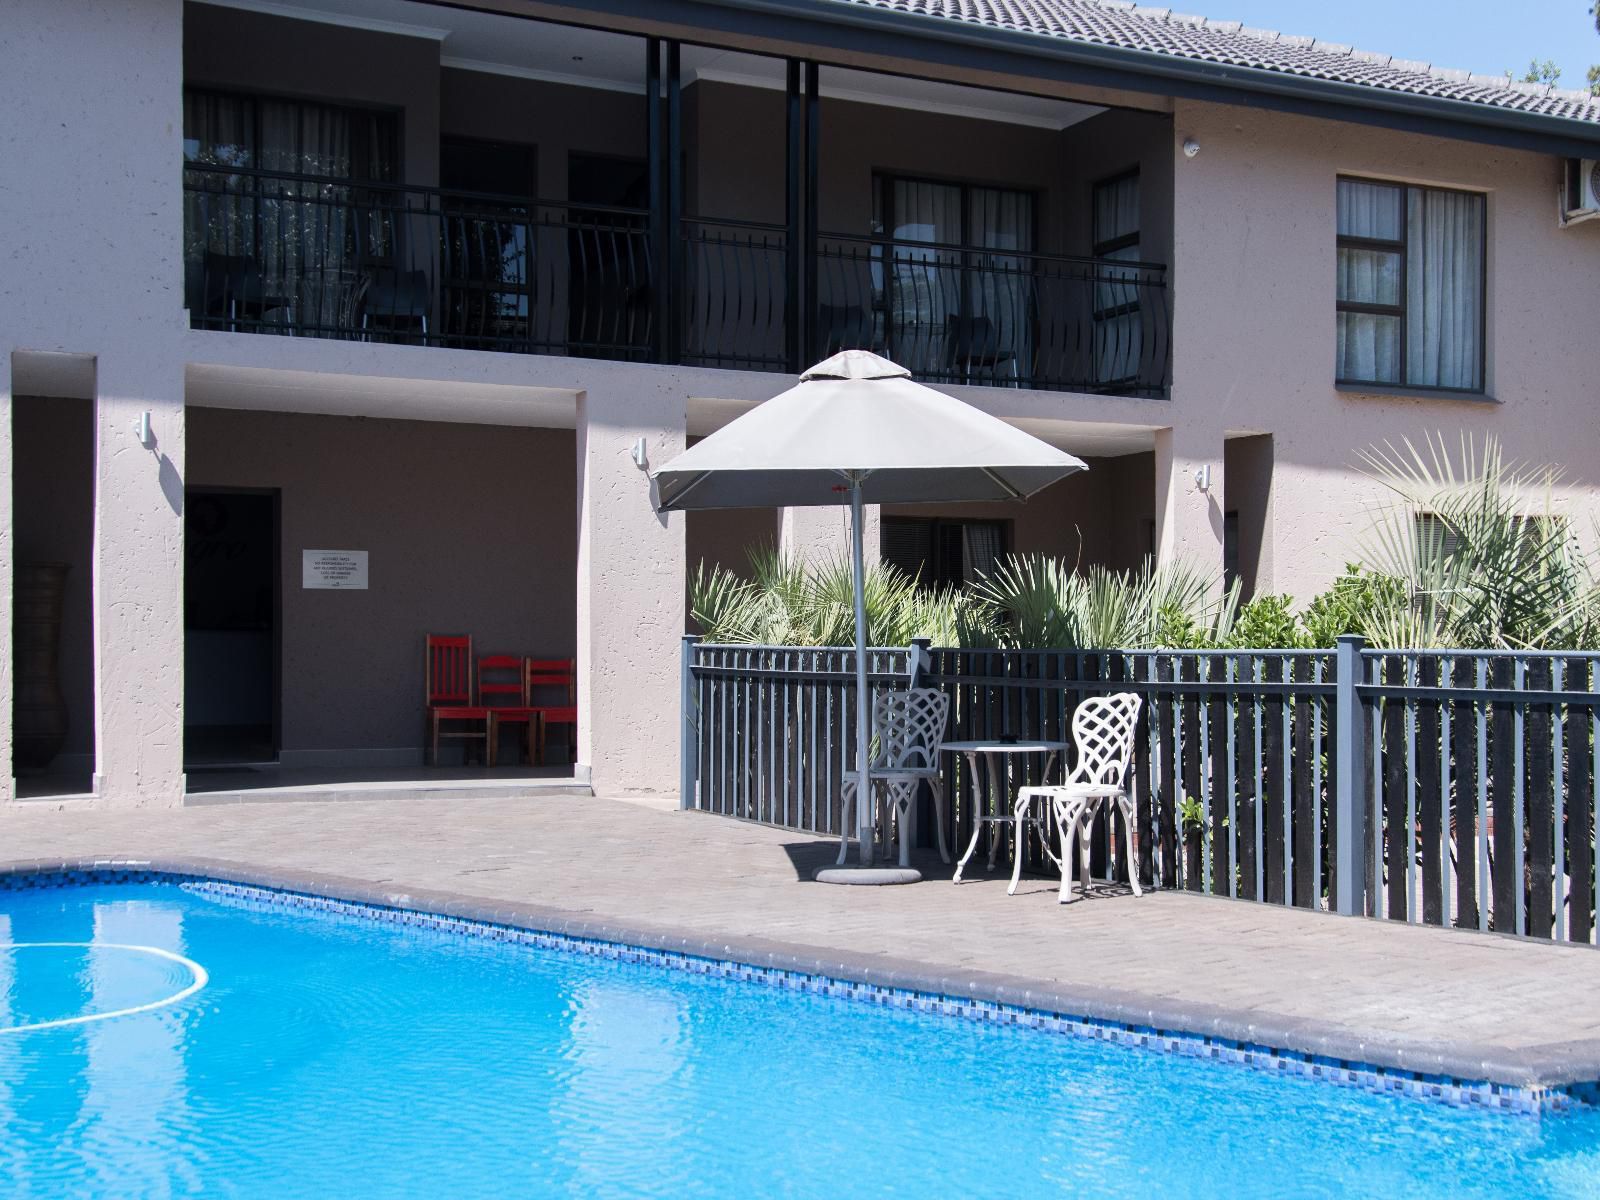 Allegro Guest House Bloemfontein Bayswater Bloemfontein Free State South Africa House, Building, Architecture, Swimming Pool